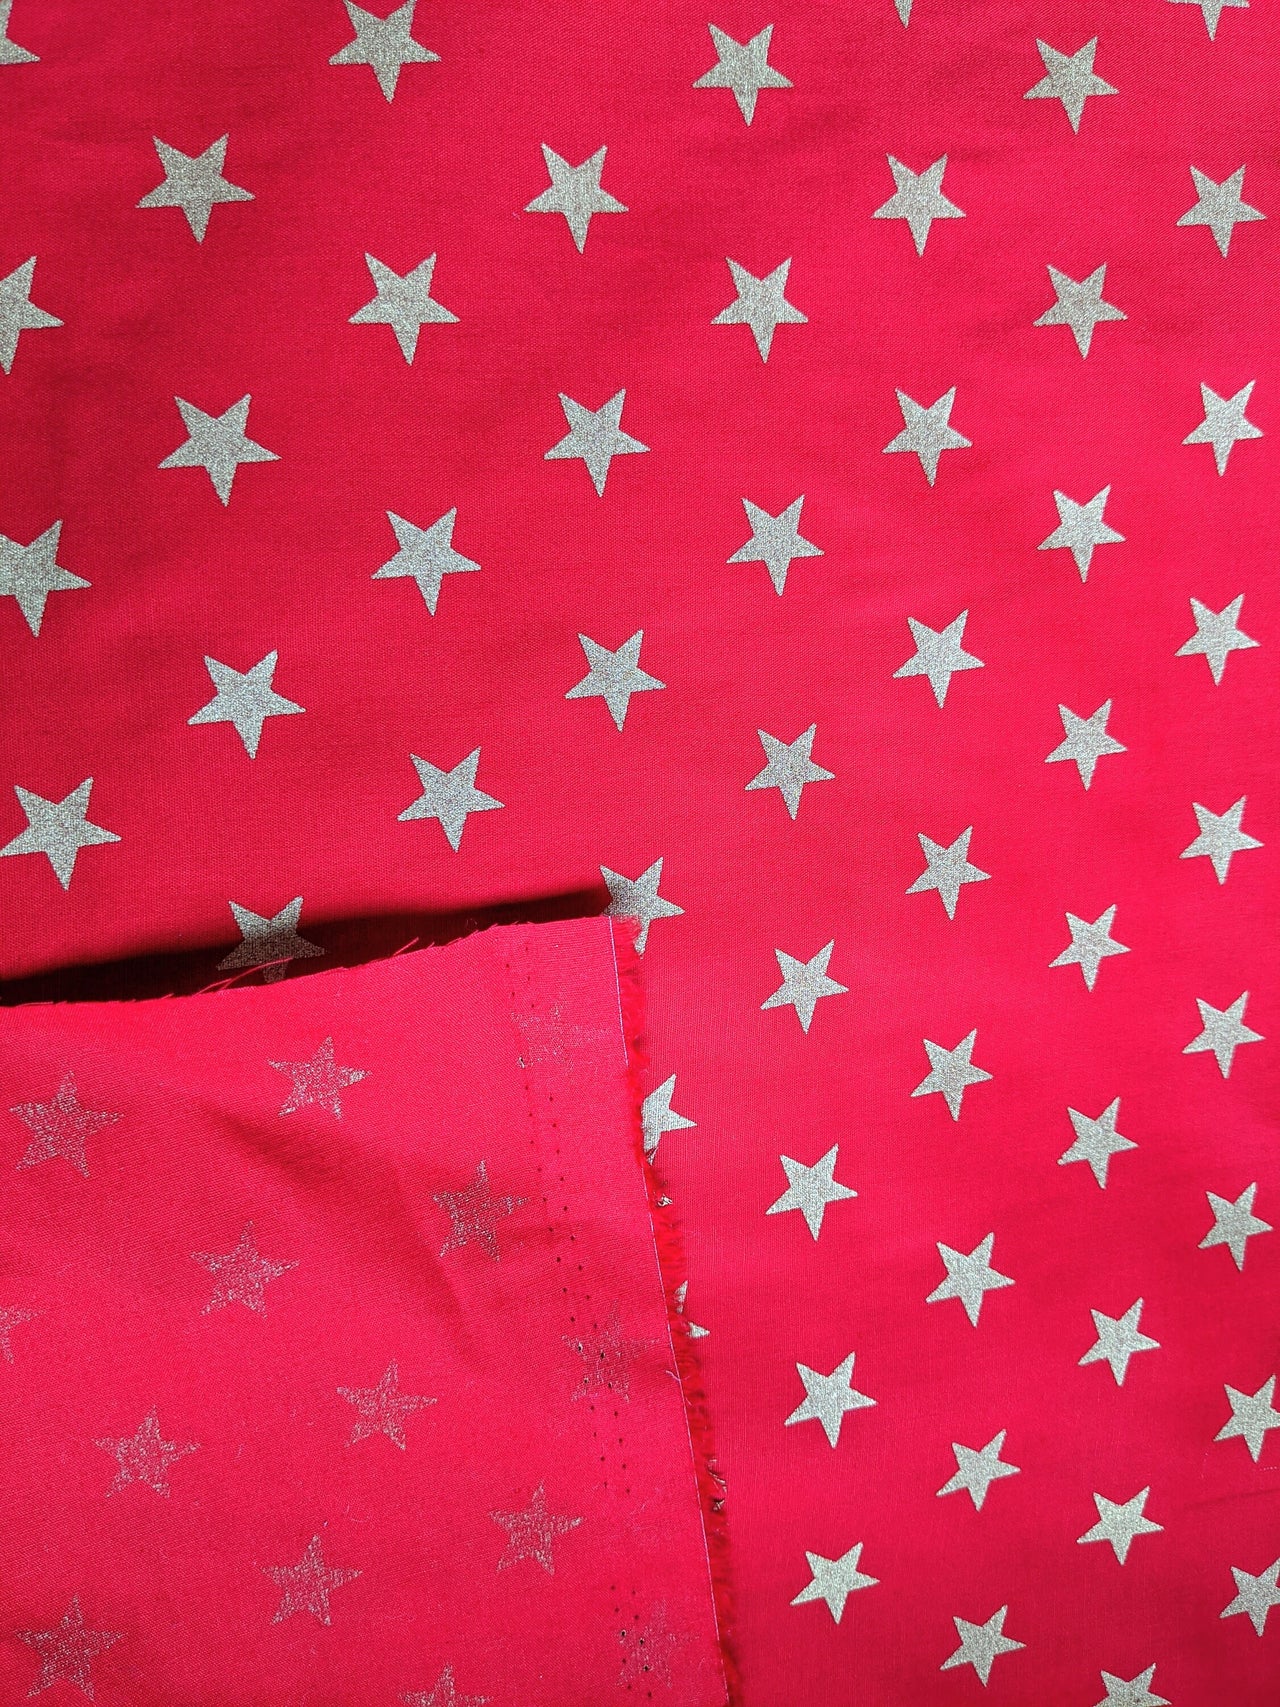 Red Cotton Poplin Fabric With Gold Stars Christmas Fabric, Festive Fabric, Holiday Fabric